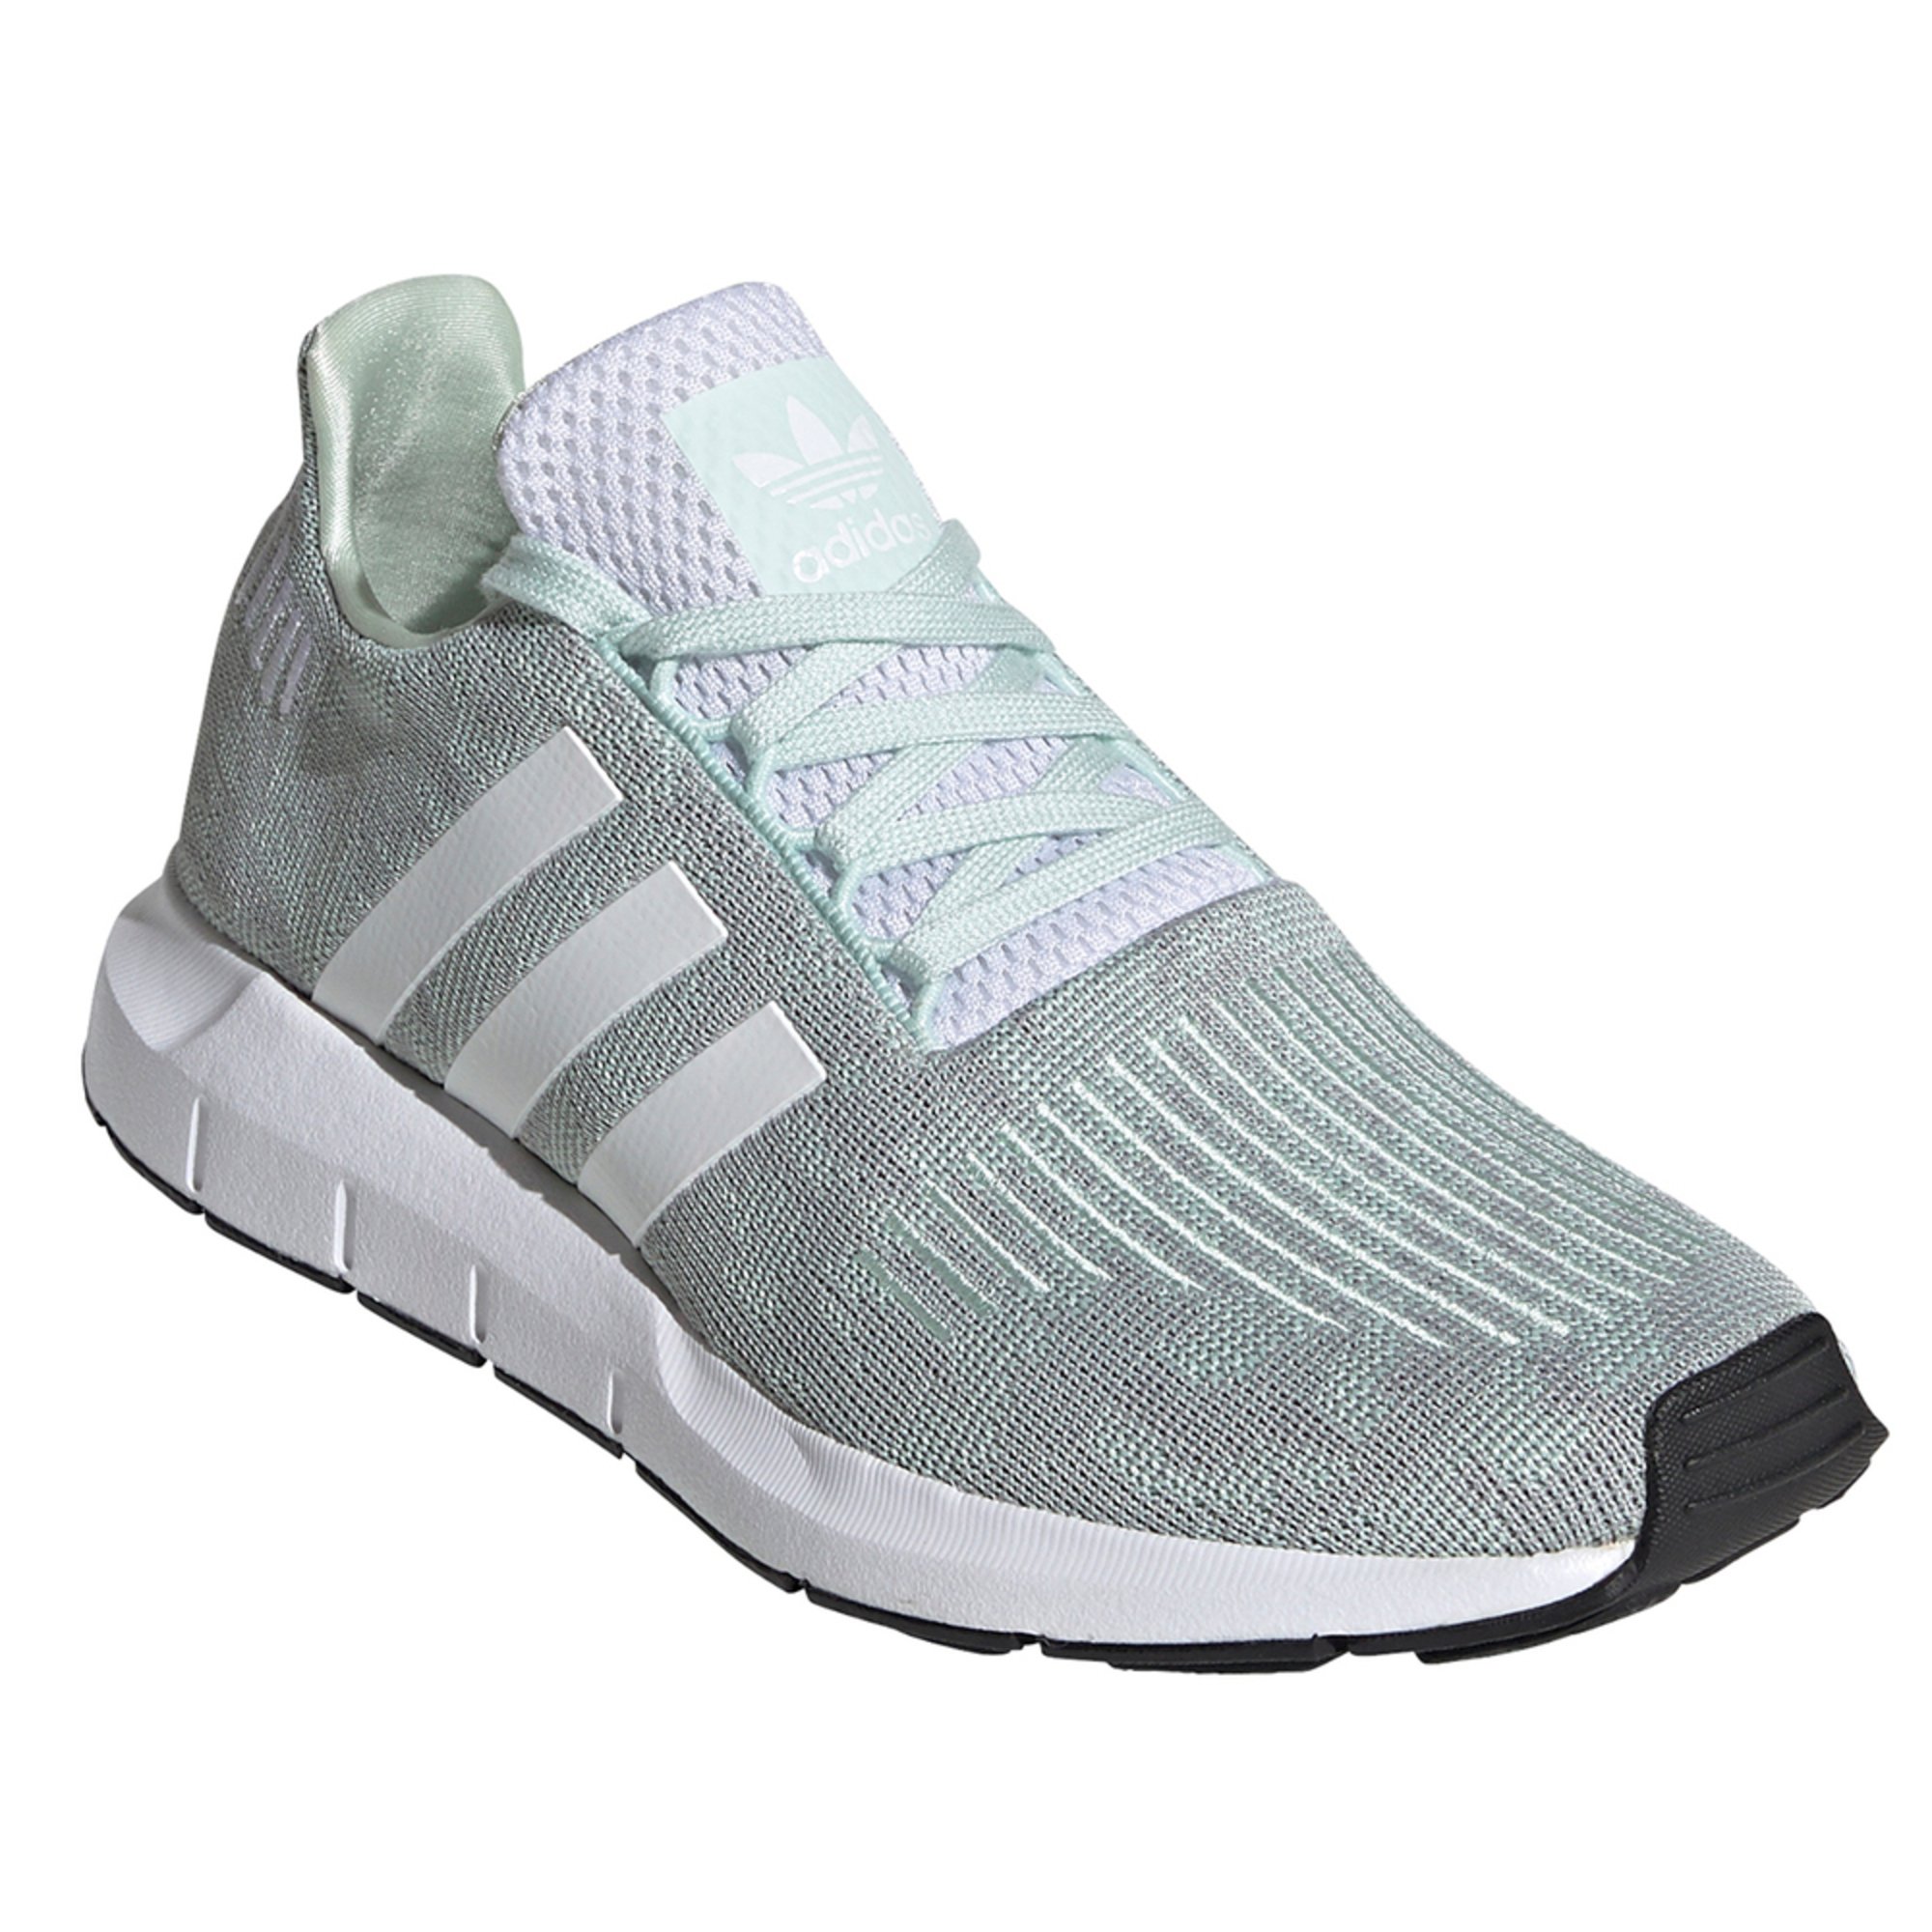 are adidas swift run shoes good for running